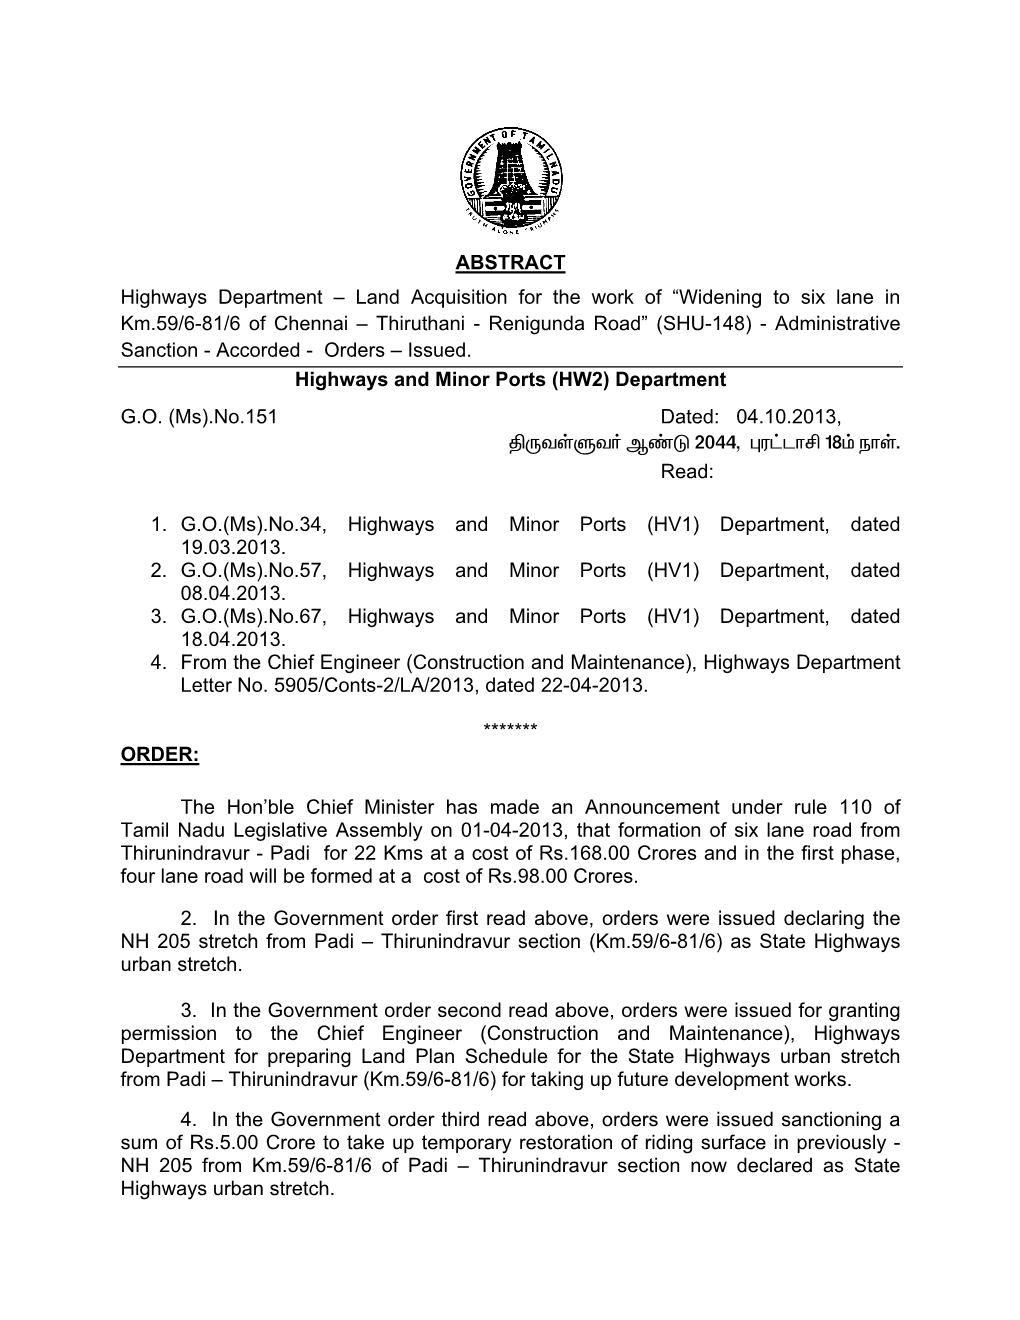 ABSTRACT Highways Department – Land Acquisition for the Work of “Widening to Six Lane in Km.59/6-81/6 of Chennai – Thiruth